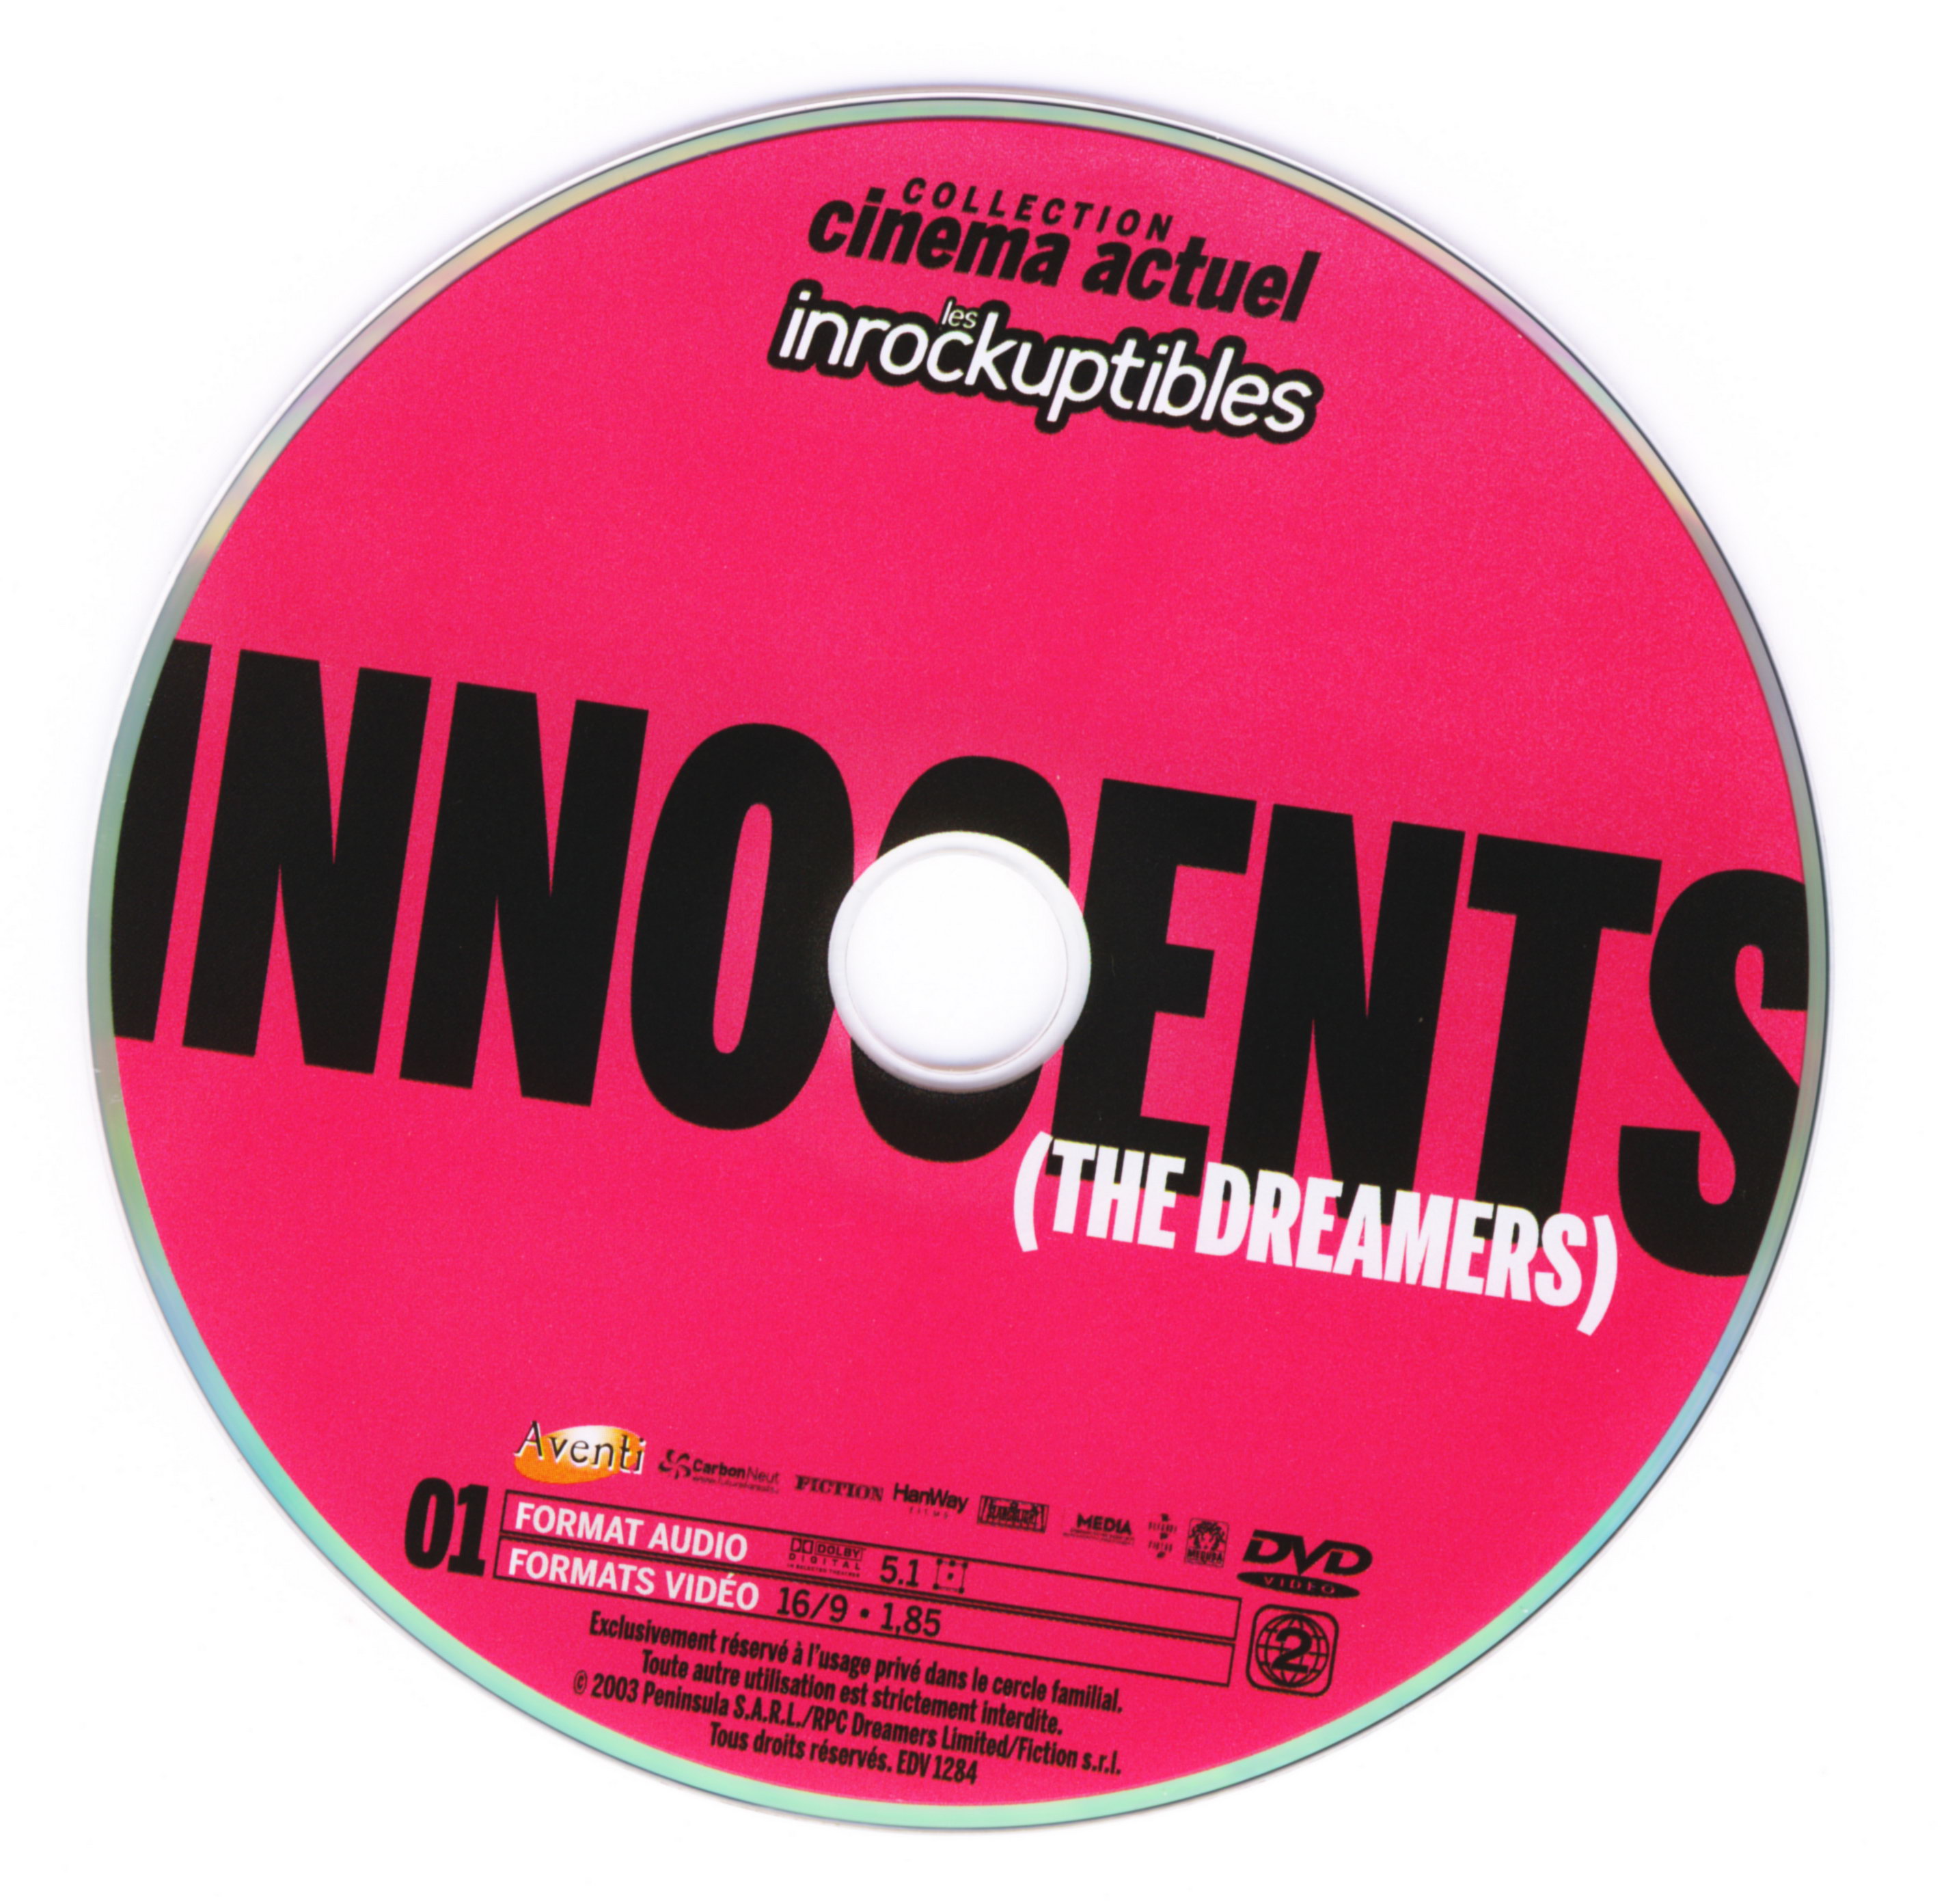 Innocents the dreamers